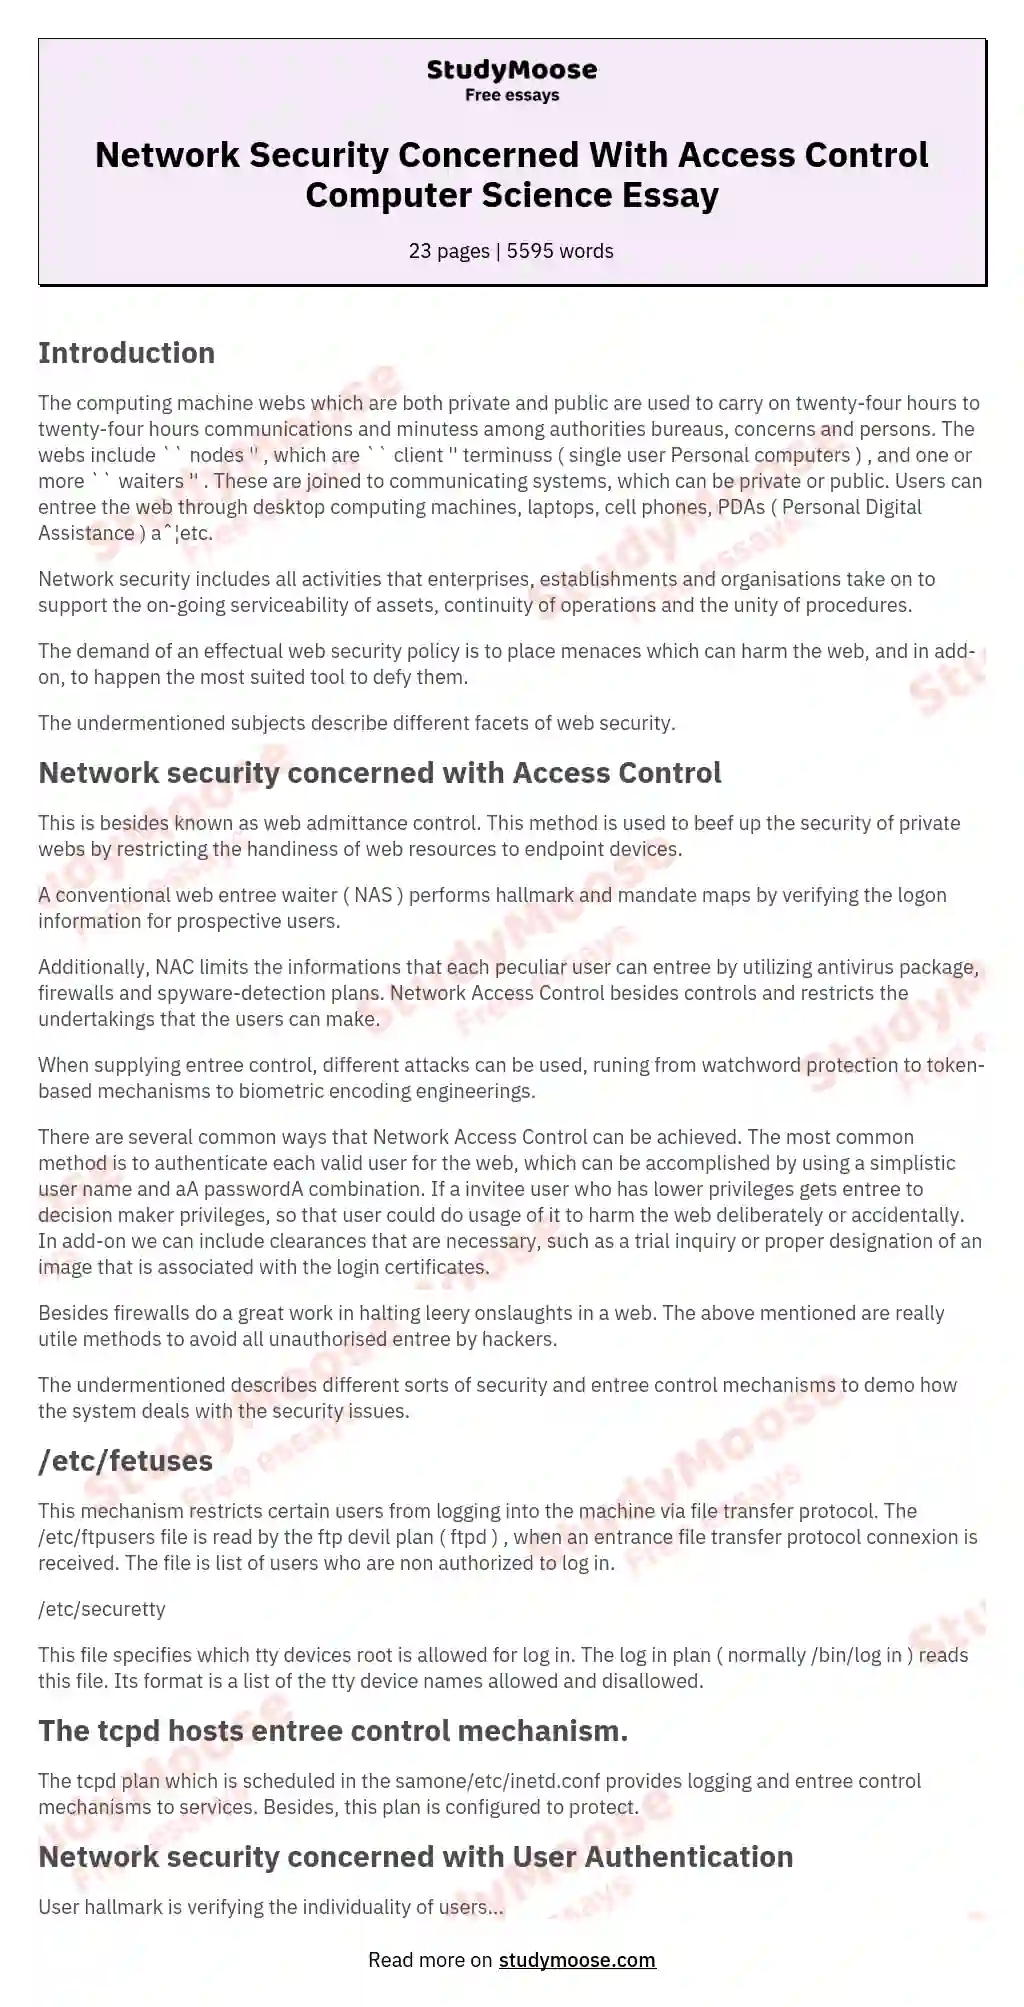 Network Security Concerned With Access Control Computer Science Essay